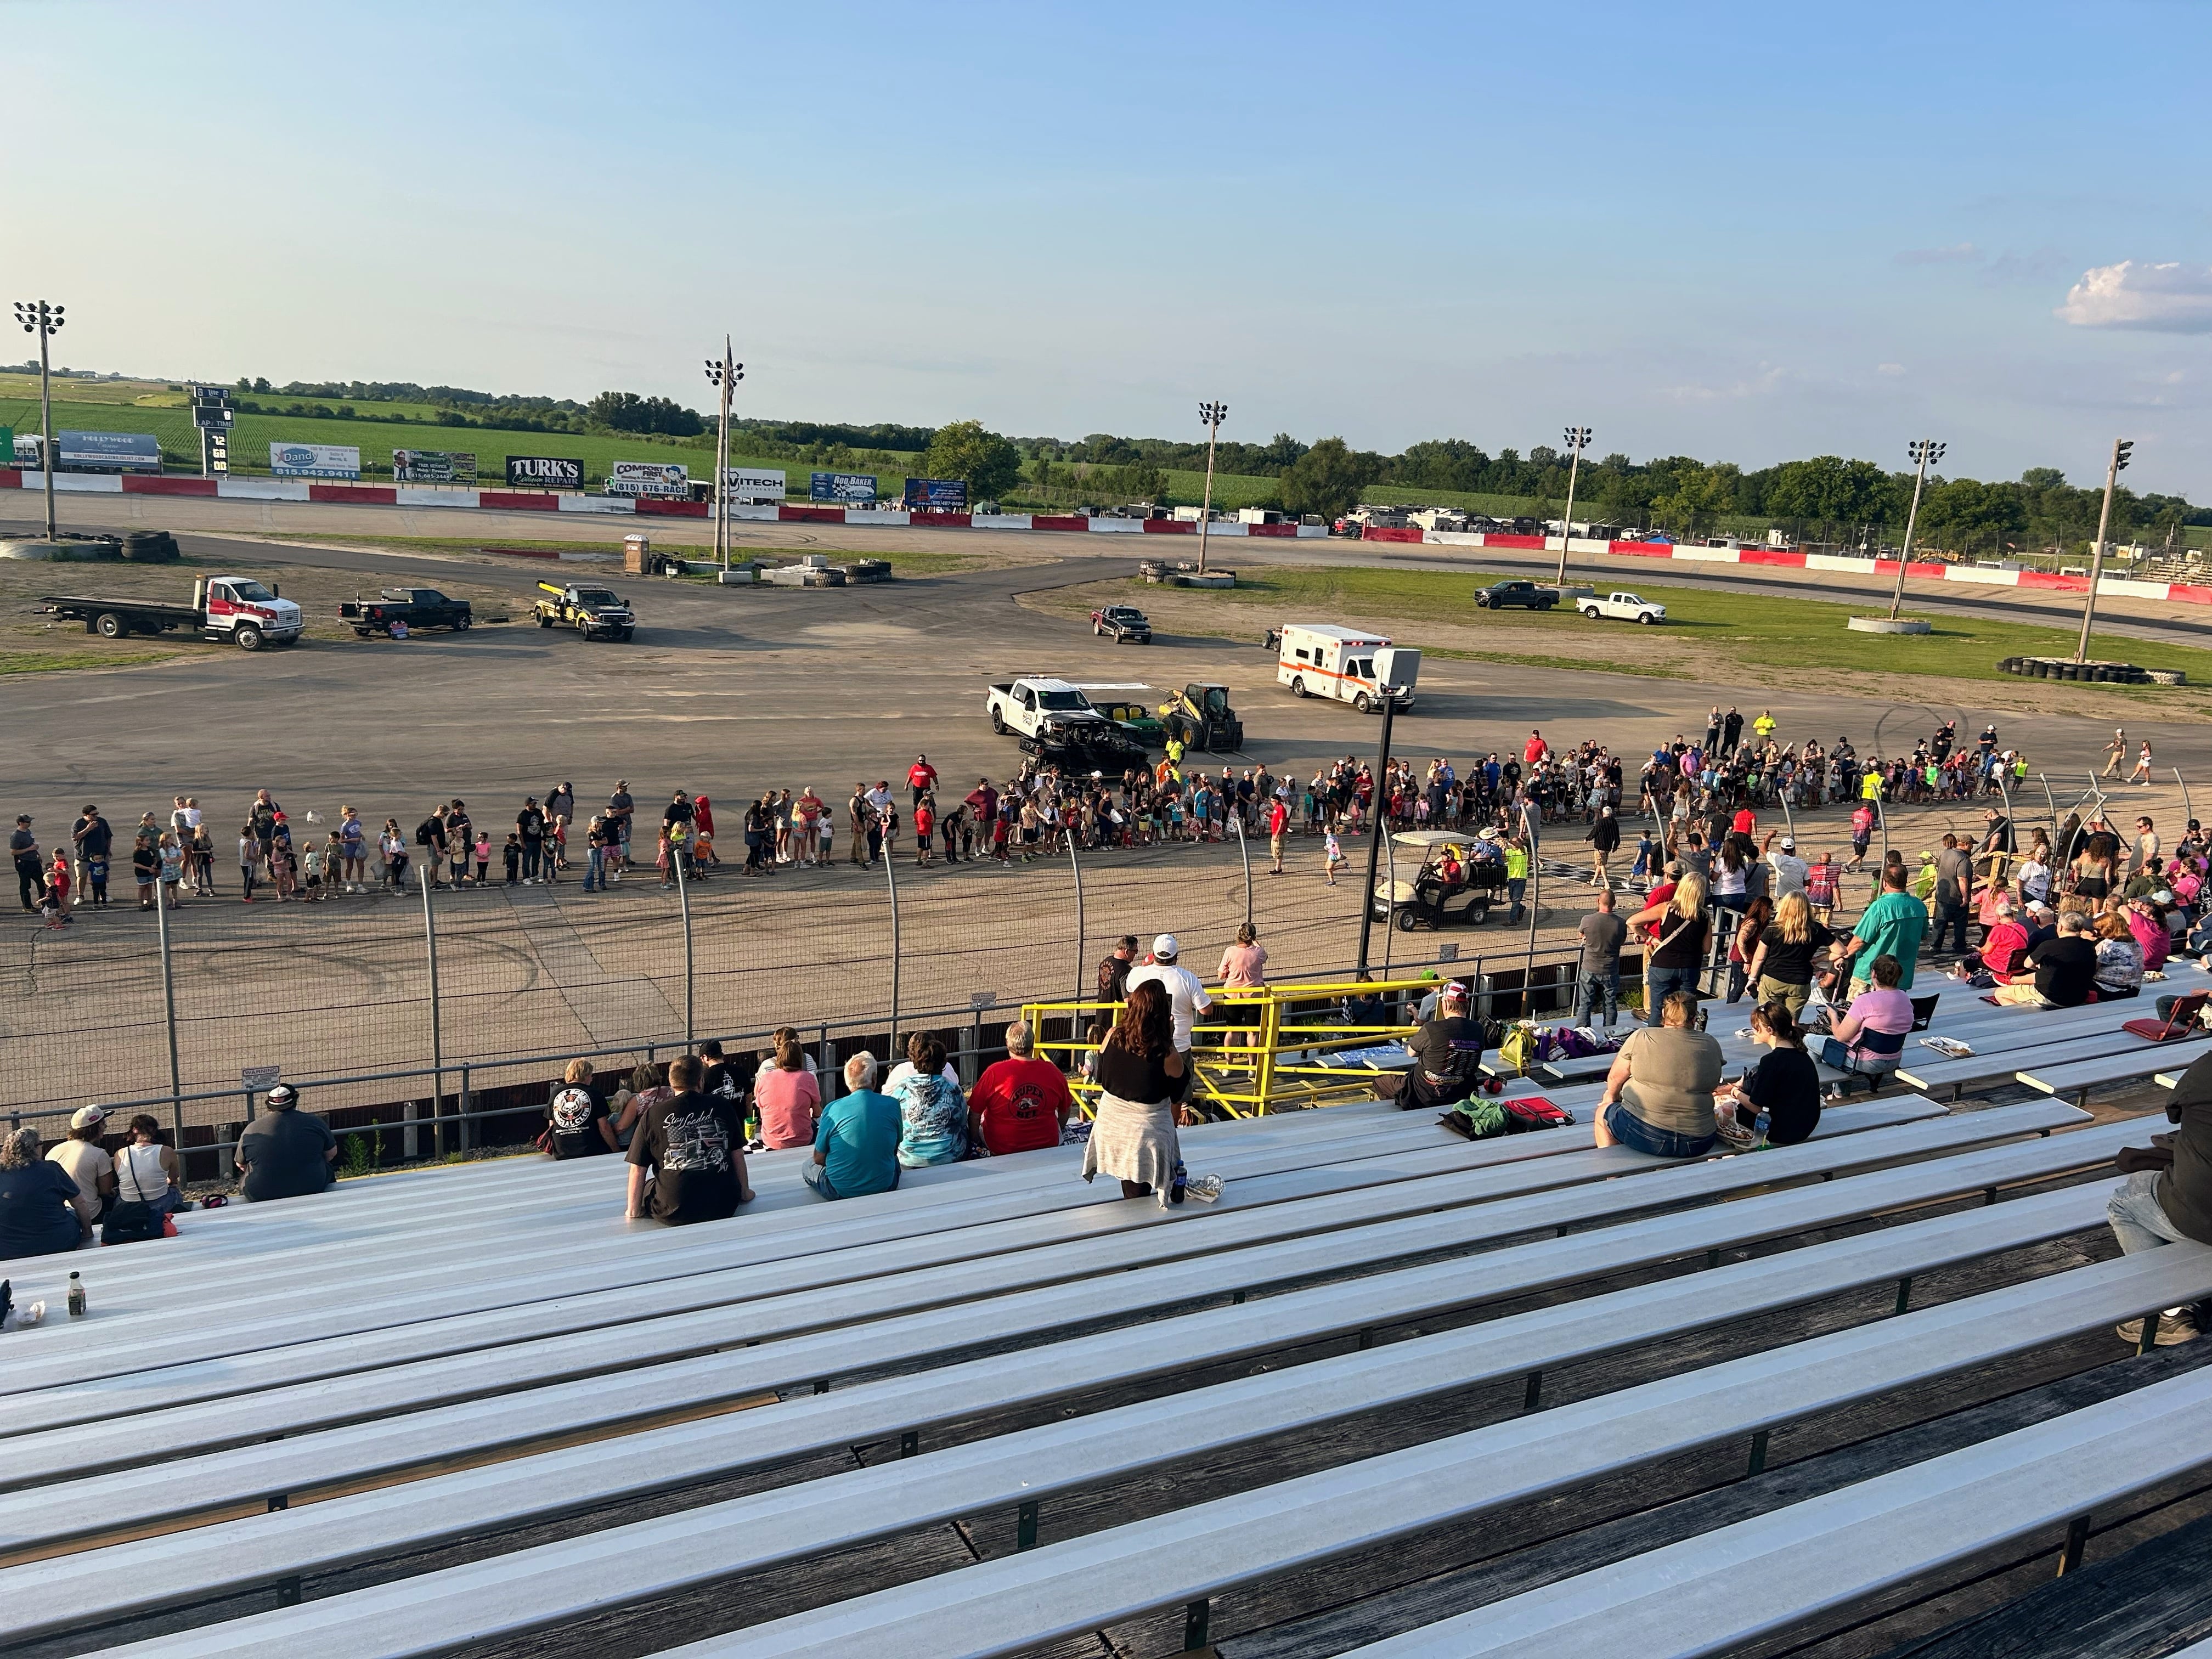 Cheryl Hryn Racing gives away 112 bikes, 4 scooters at Grundy County Speedway Kids Night